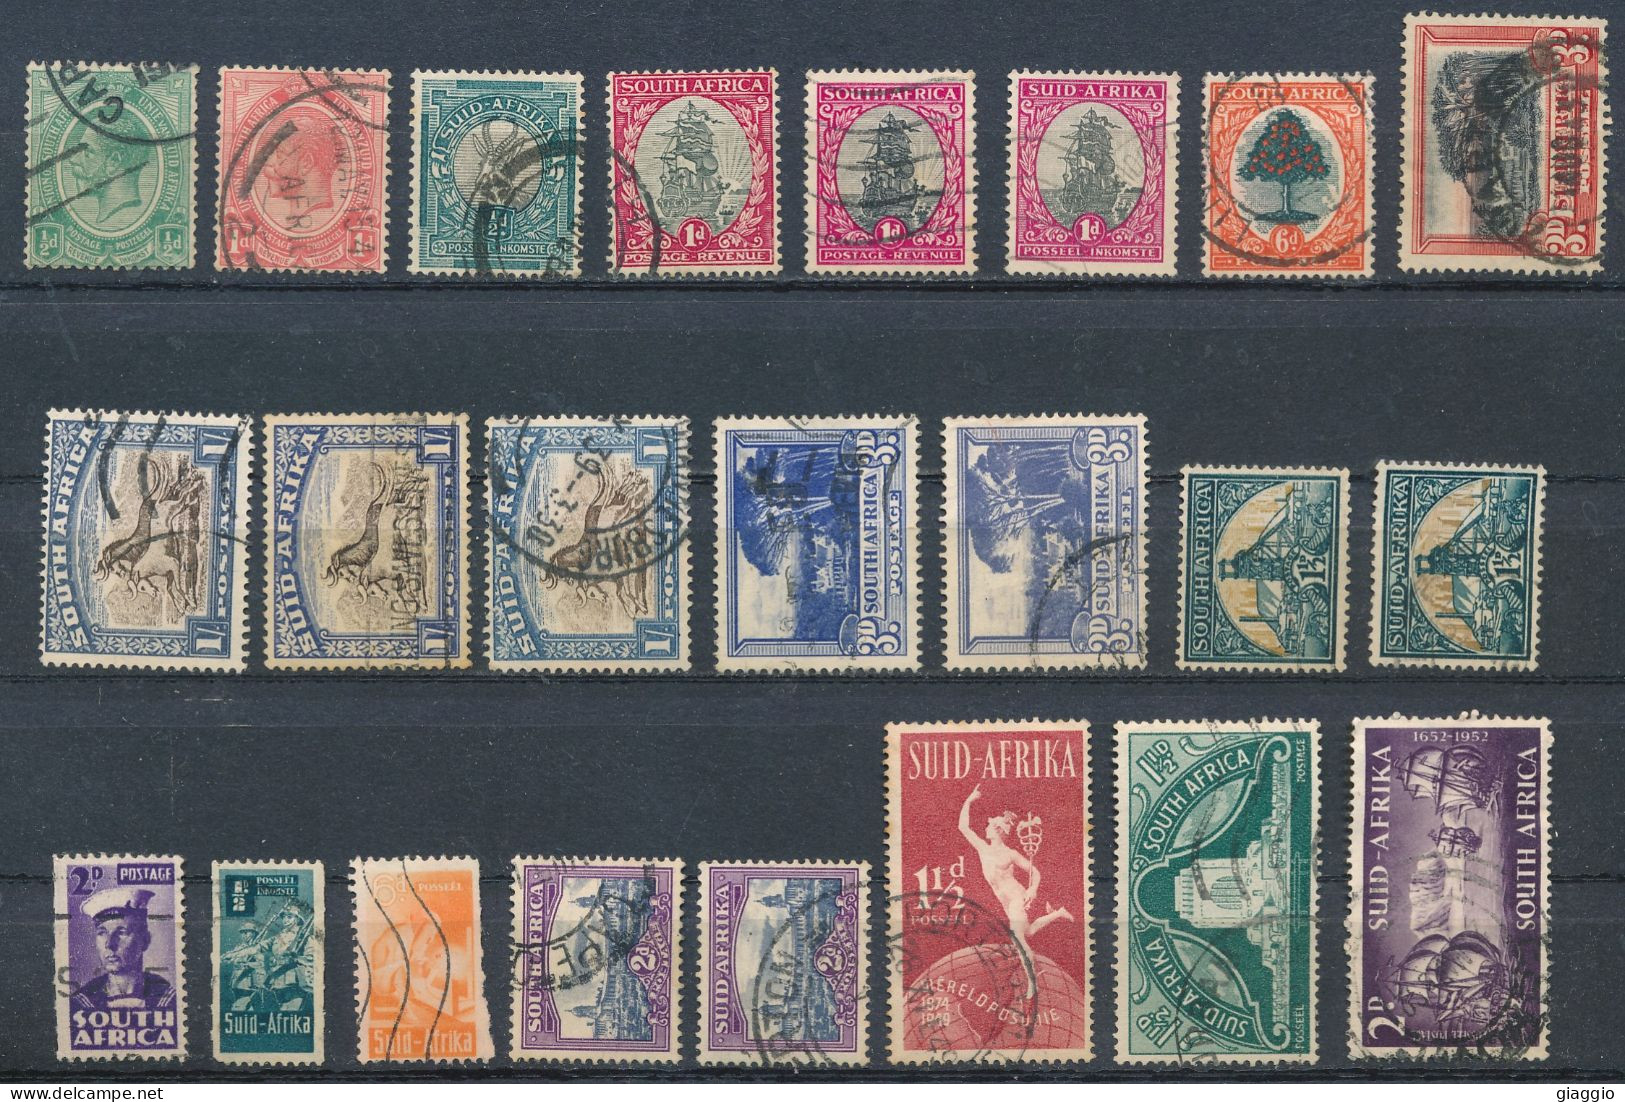 °°° SOUTH AFRICA  - Y&T N°2/188 (23pz) - 1913/1952 °°° - Used Stamps